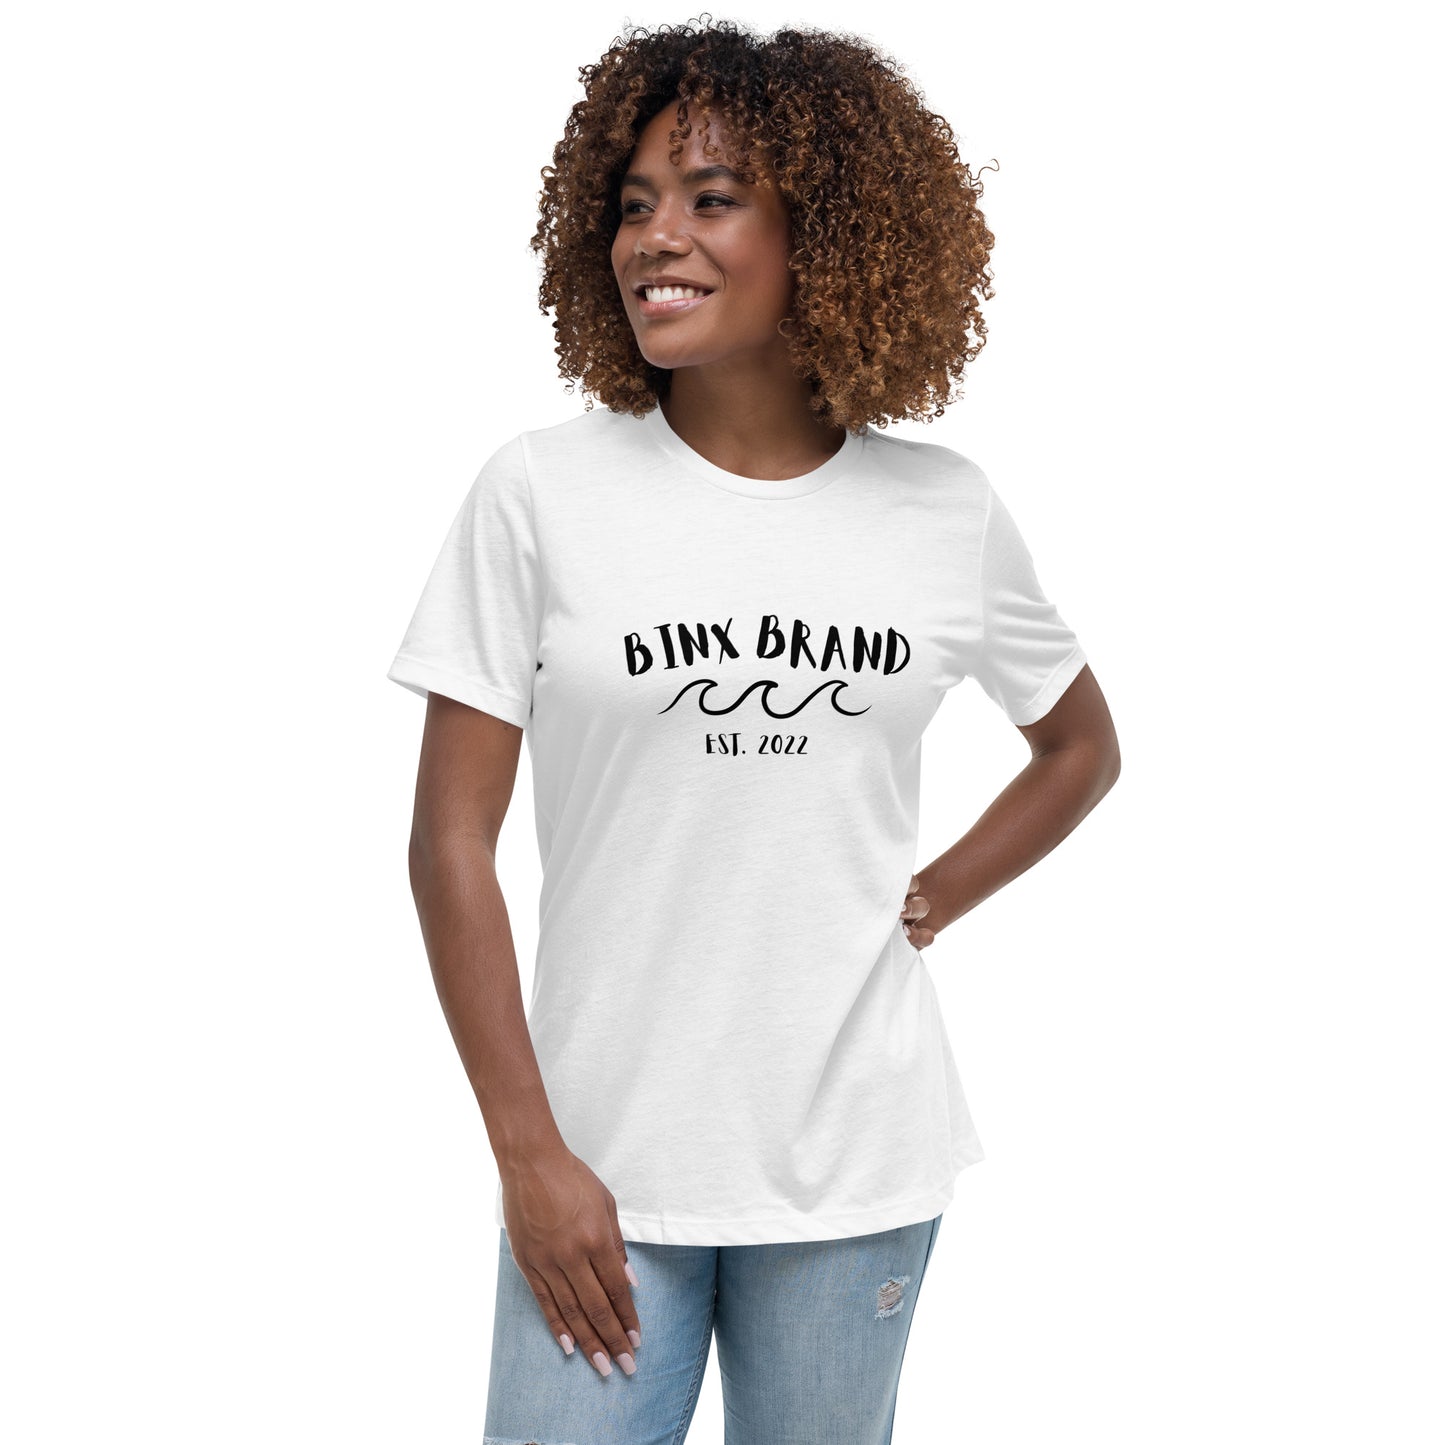 Binx - Women's Relaxed T-Shirt (Multiple Colors)